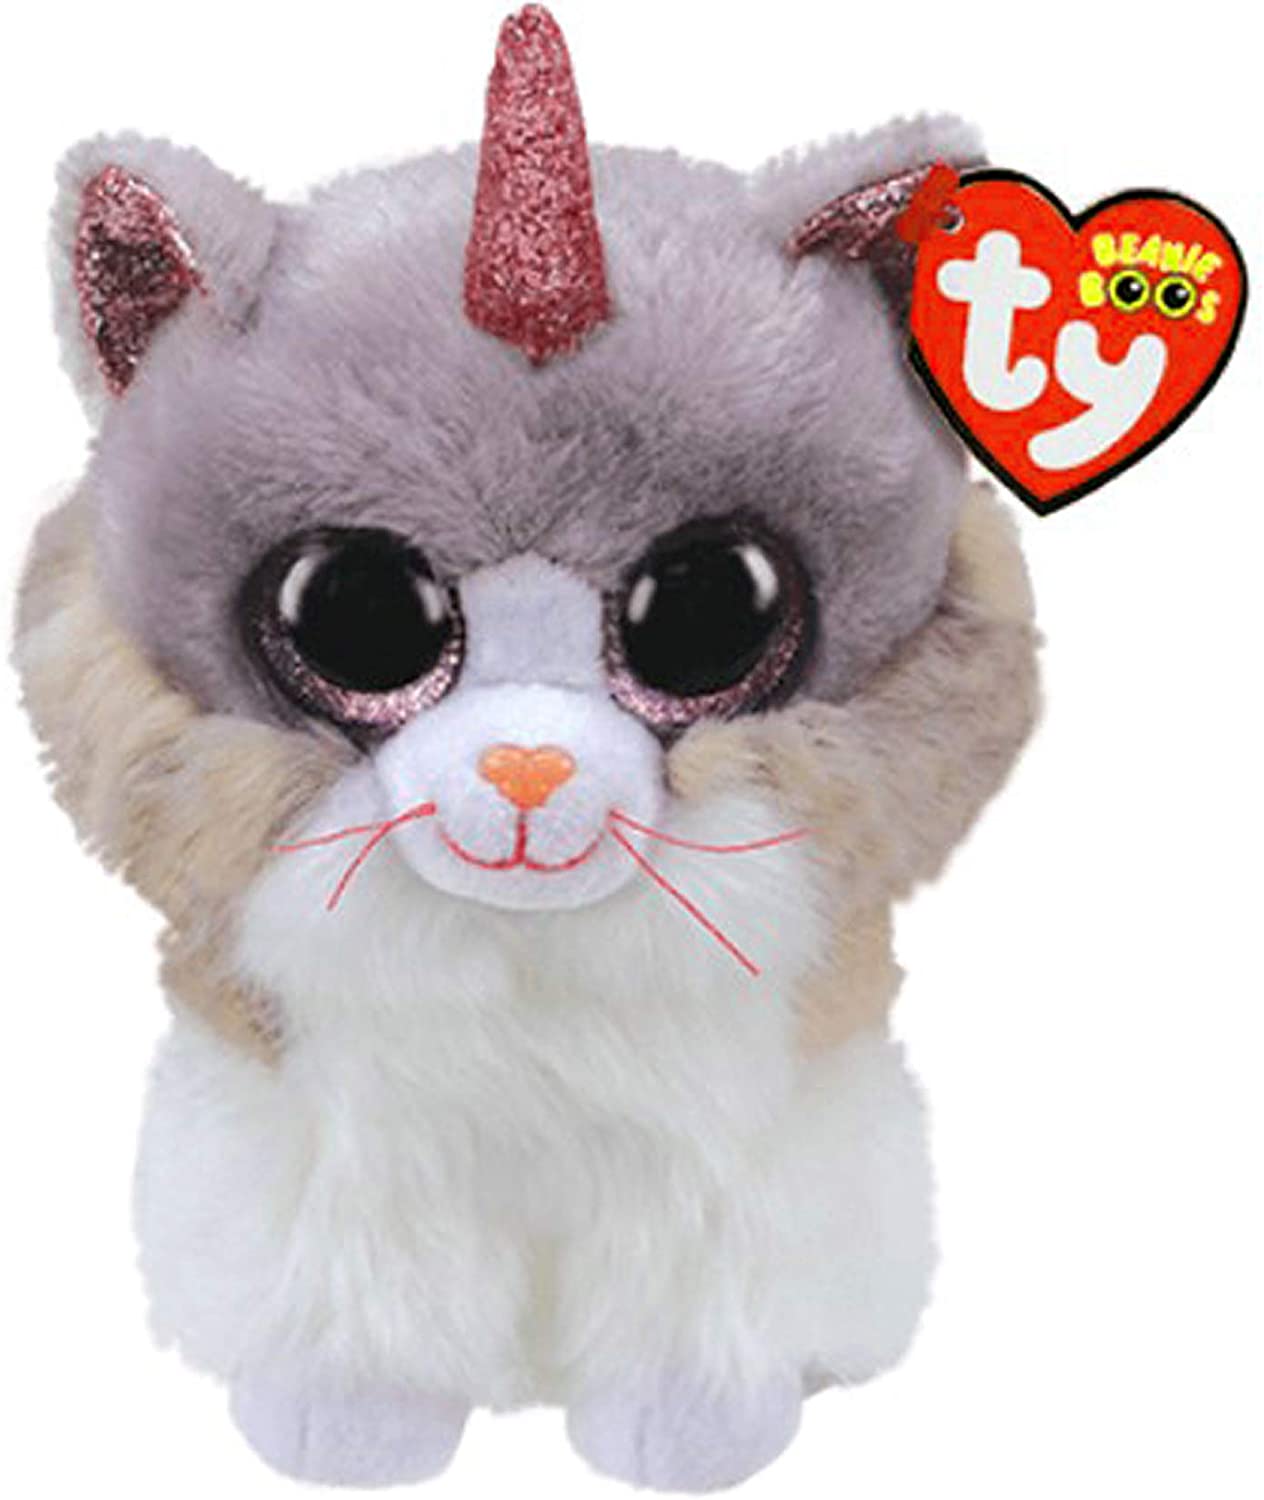 TY 36306 – Asher Cat Beanie Boo Plush Toy